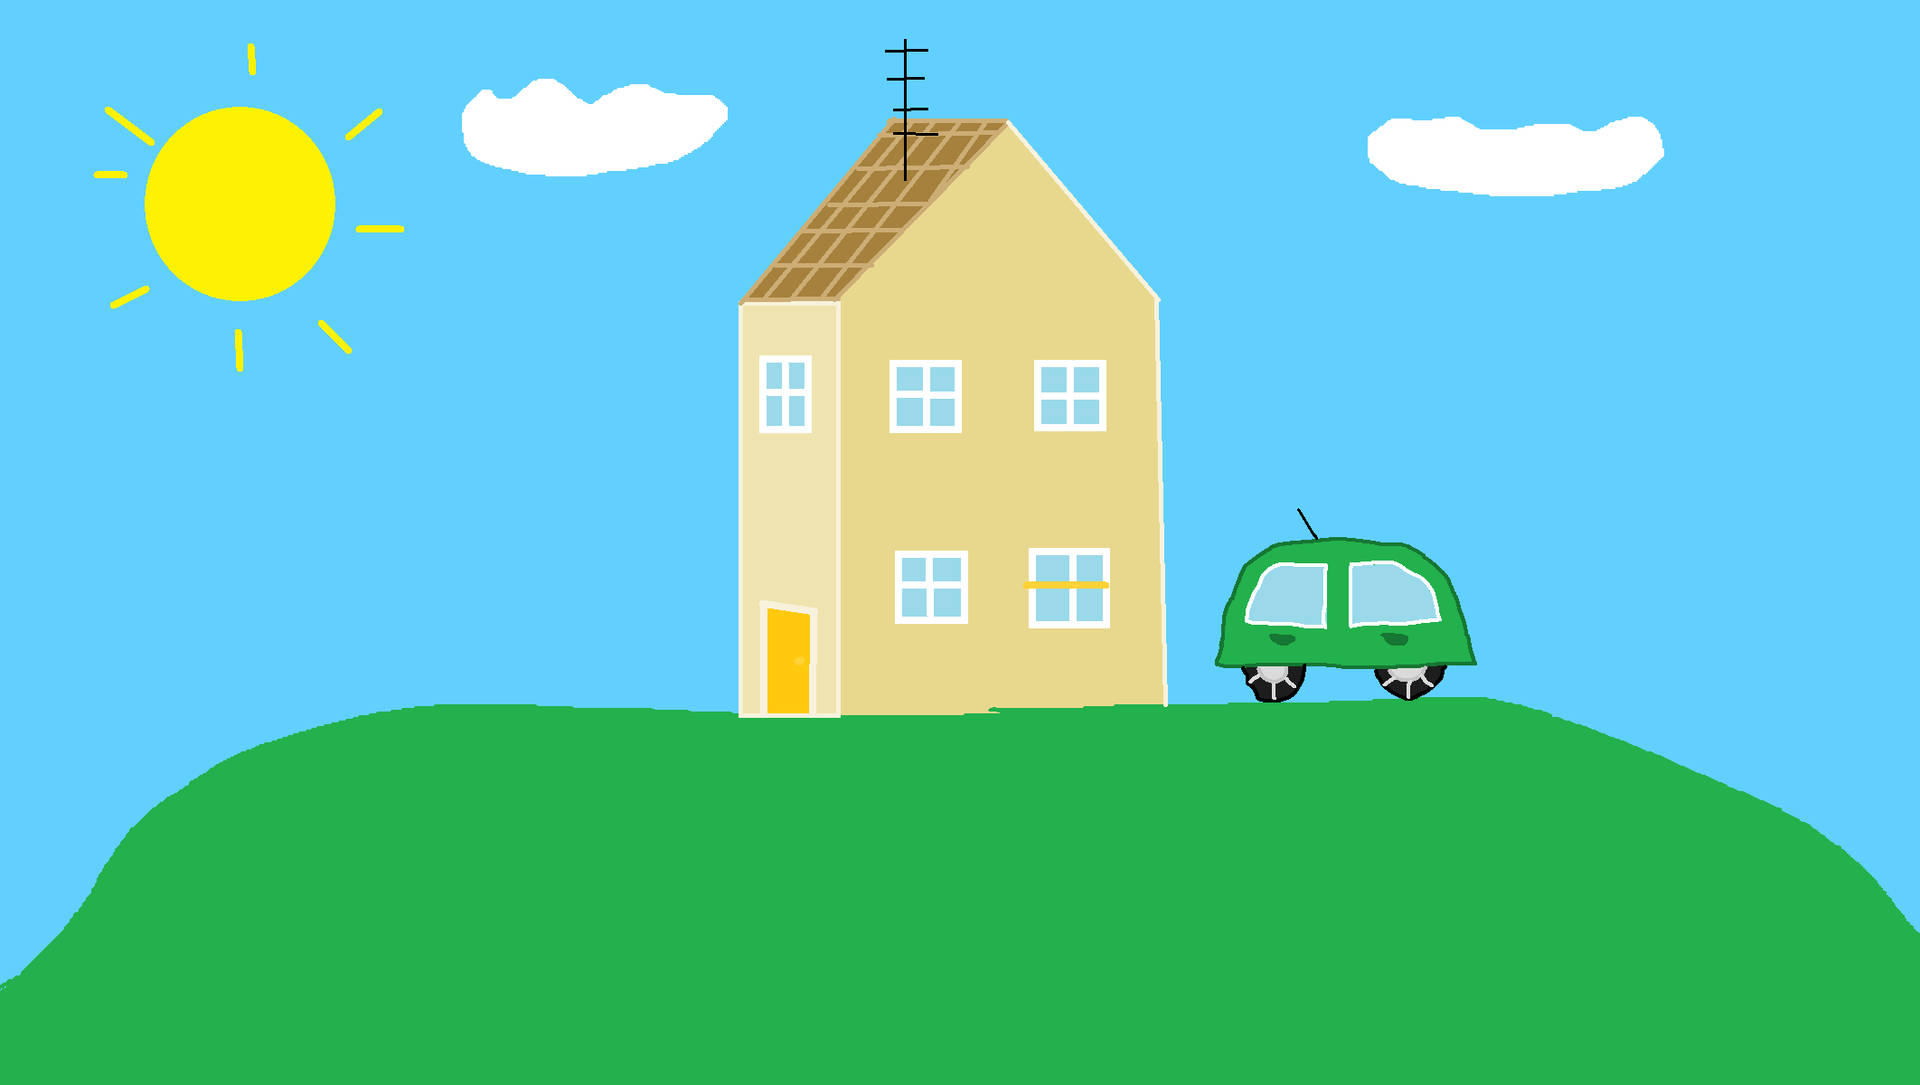 Peppa Pig House With Green Car